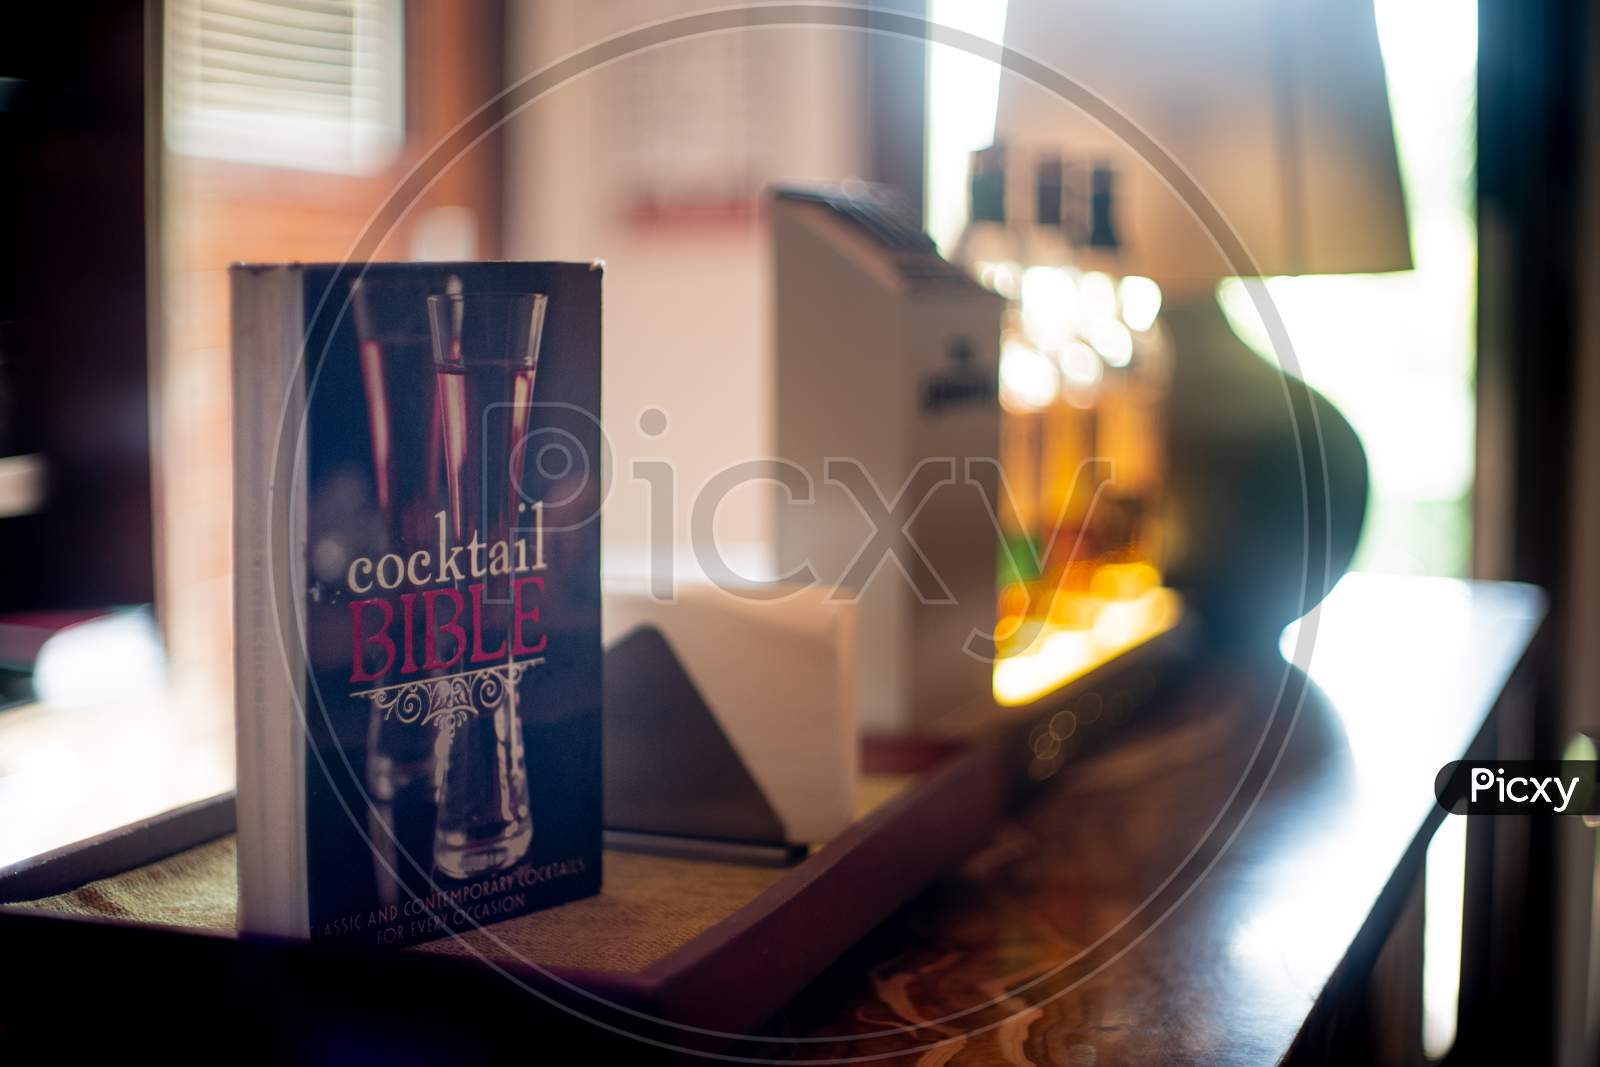 Cocktail Bible Book Guide Kept At The Counter Of A Bar Pub In India With Out Of Focus Bottles In The Background Showing The Rising Interest Of Liqor In India